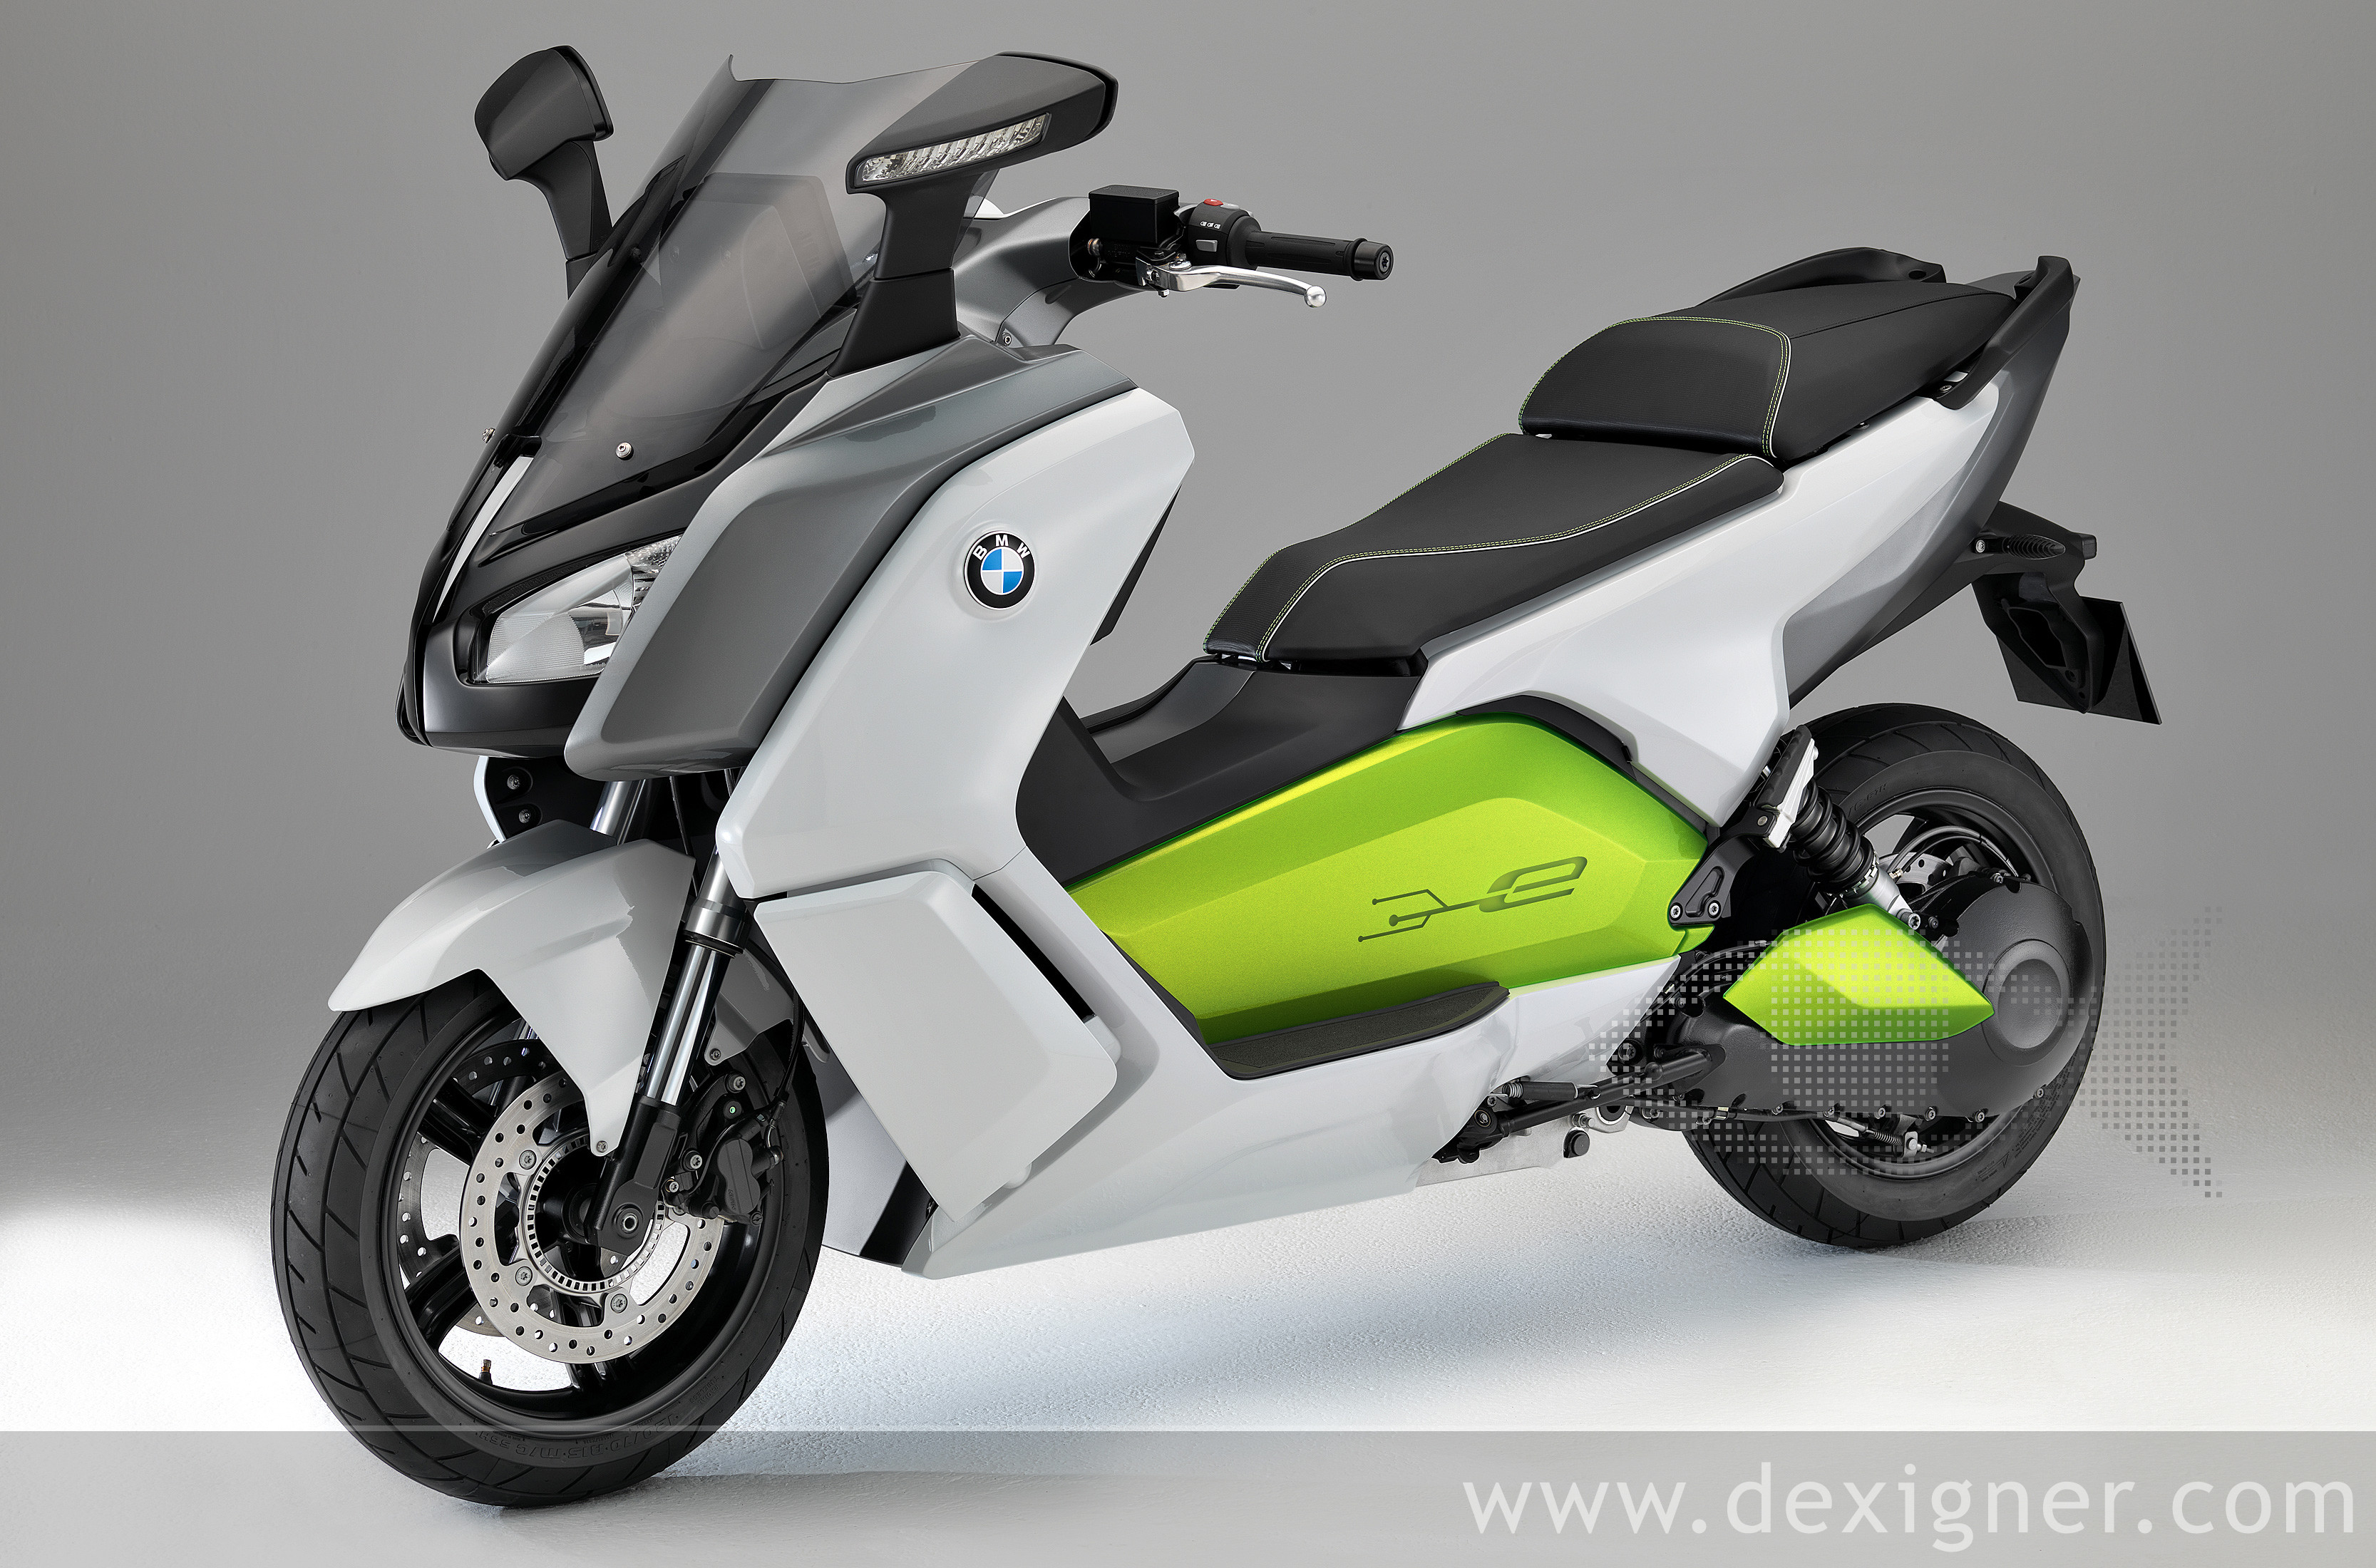 The "C evolution" draws on the innovative styling of the BMW Motorrad family